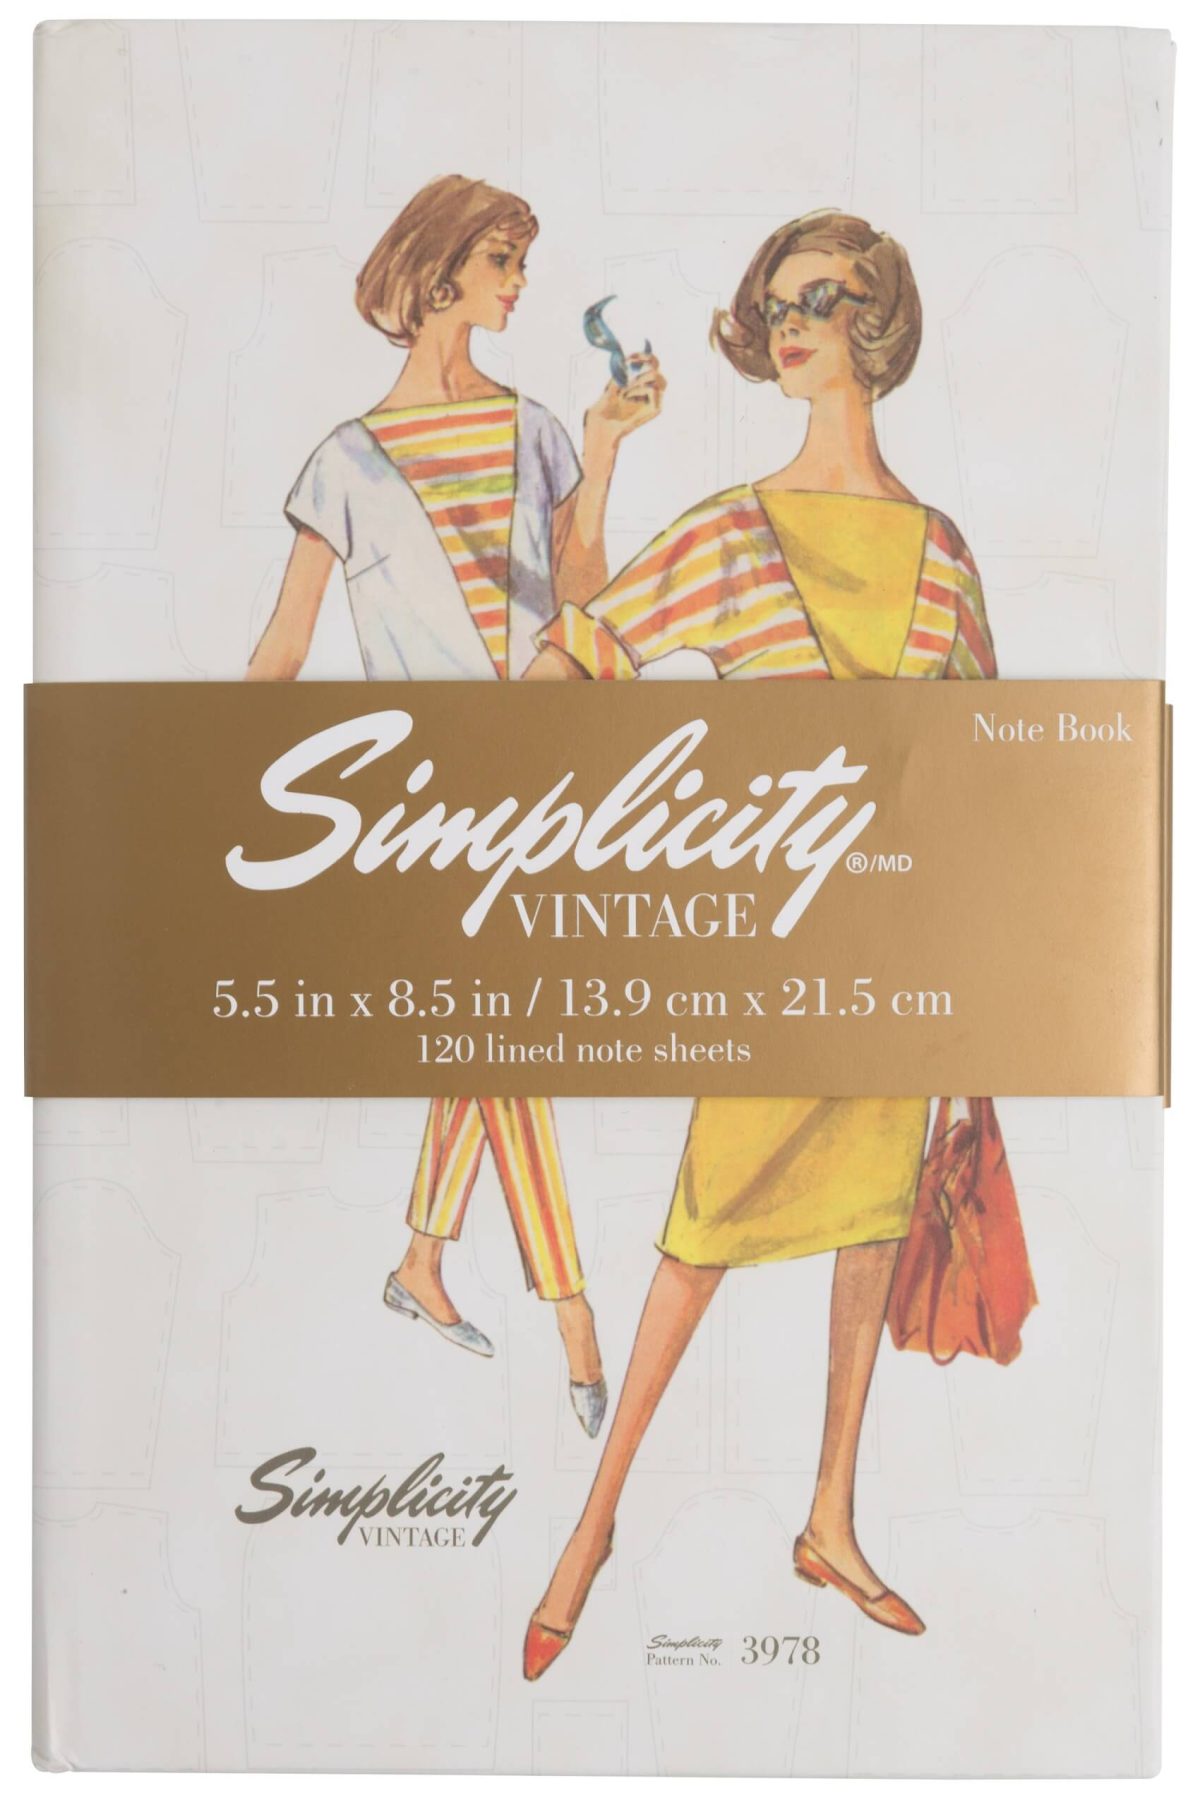 SIMPLICITY VINTAGE HARDCOVER LINED NOTEBOOK - PATTERNS 3481 3978